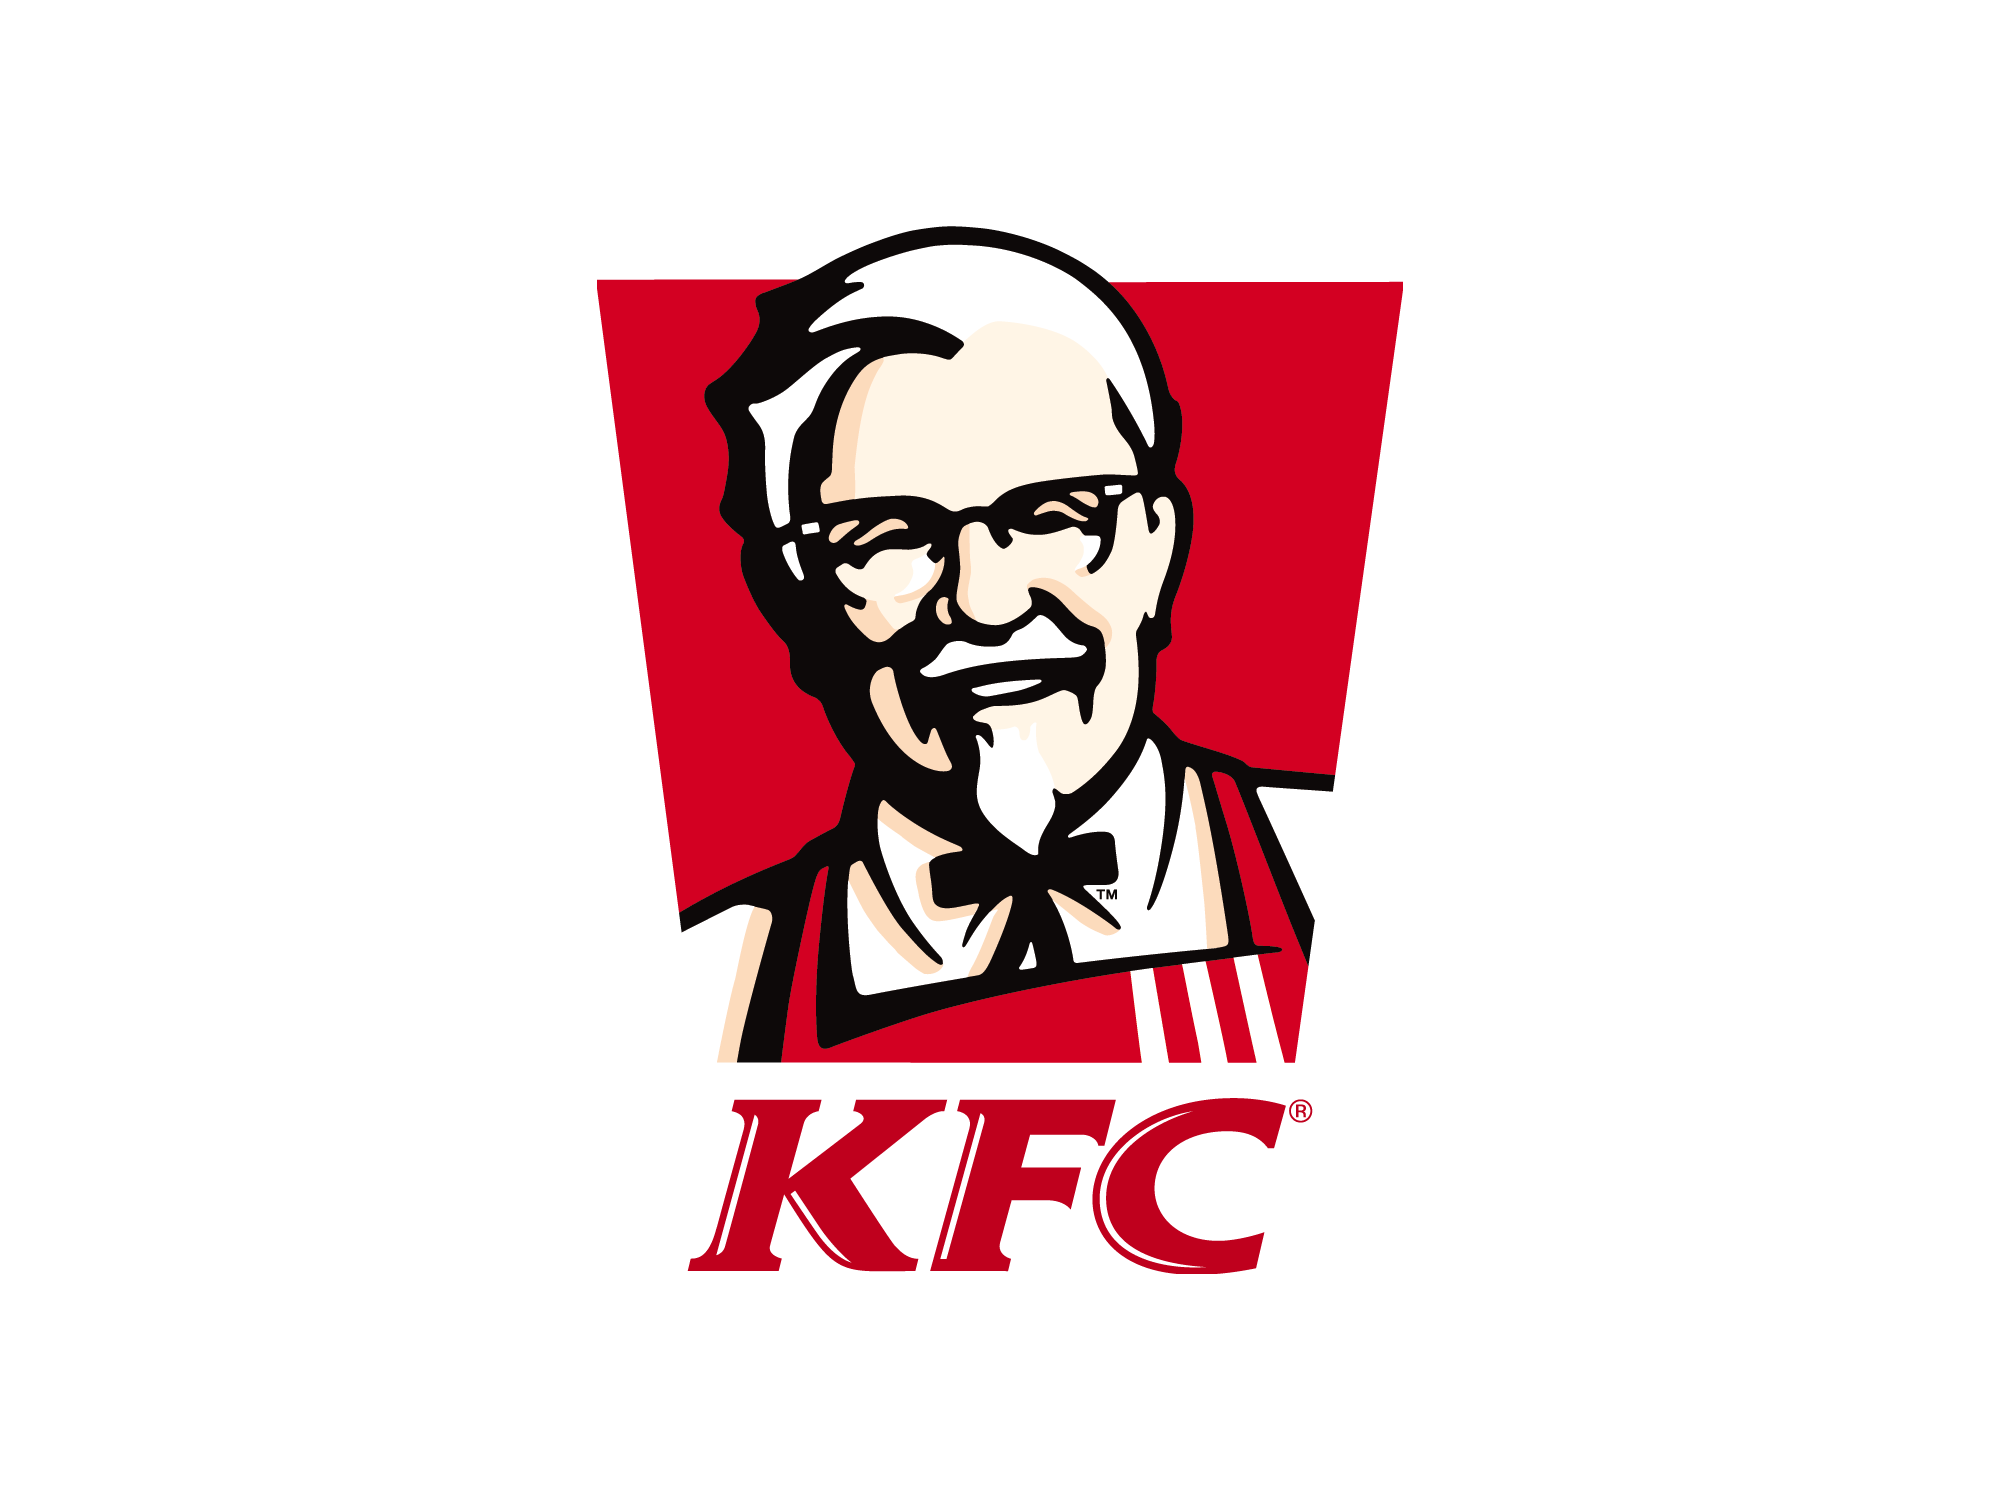 The KFC logo includes the brand name and the smiling face of its famous founder, Colonel Sanders.